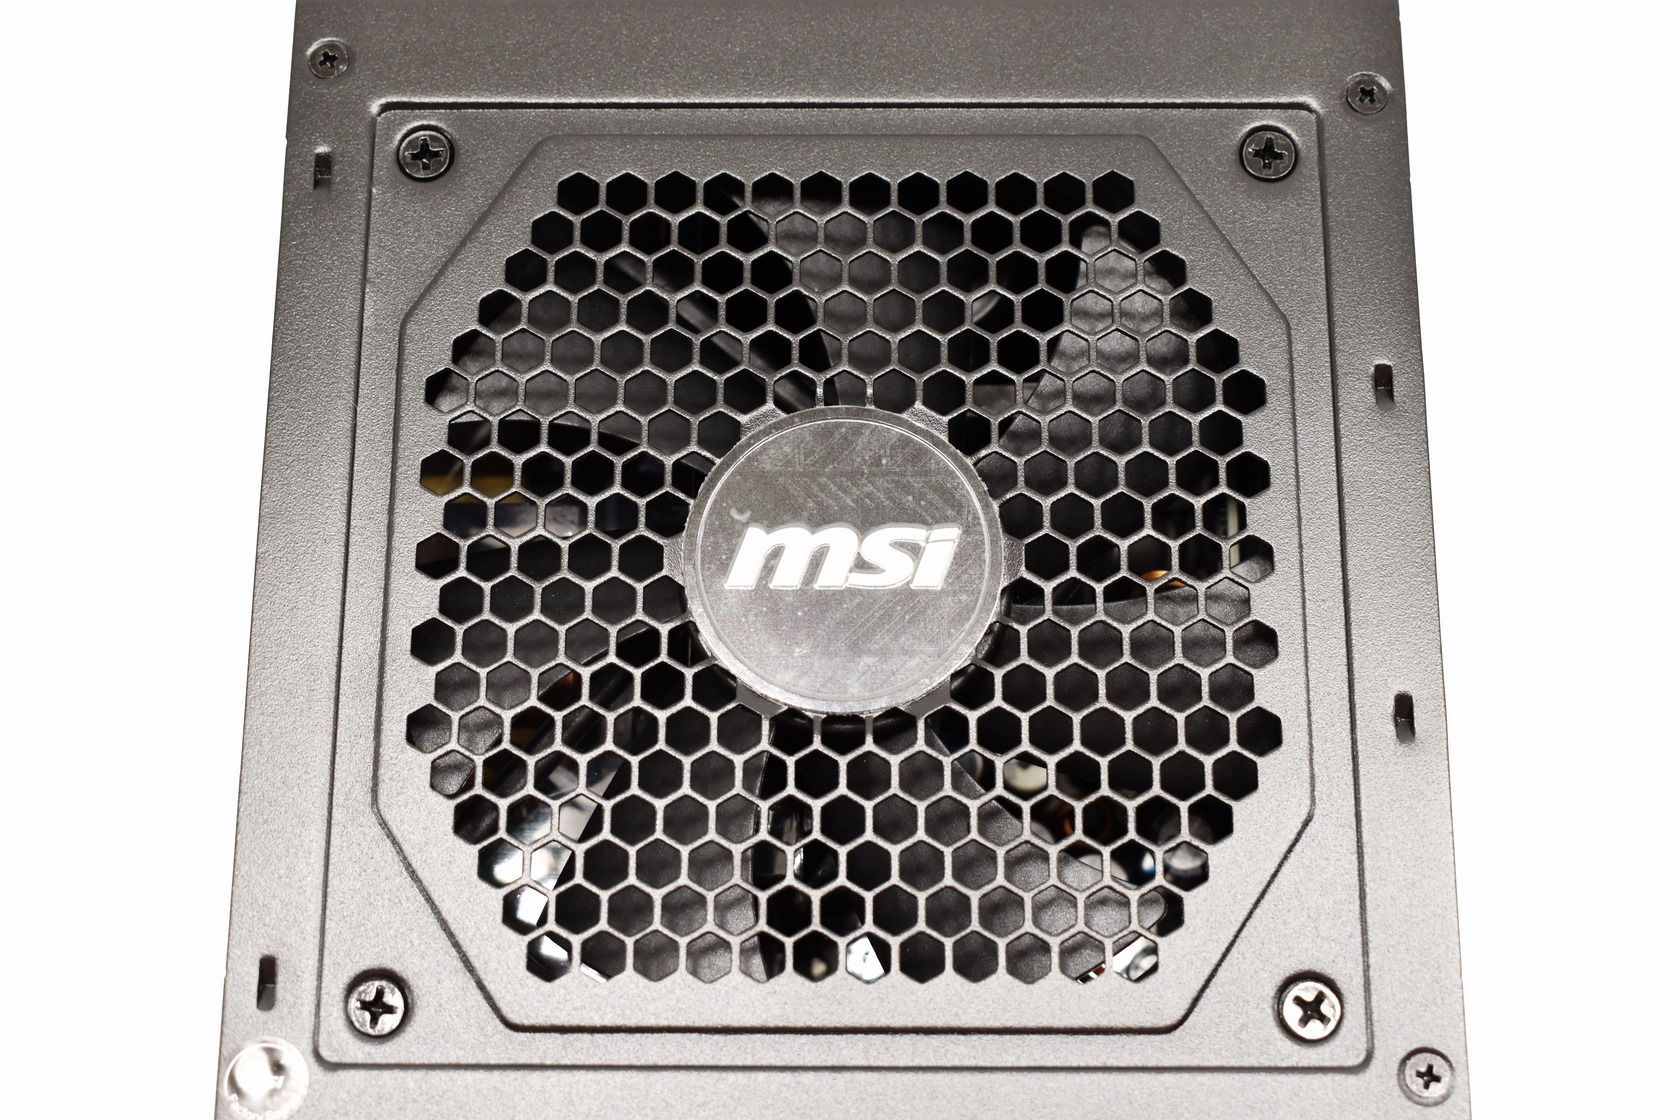 EASY PC - The ideal PSU choice for your PC. MSI MAG Power Supply Unit's  core features include 80 PLUS Bronze certification, DC to DC circuit  design, active PFC, and low-noise fan.